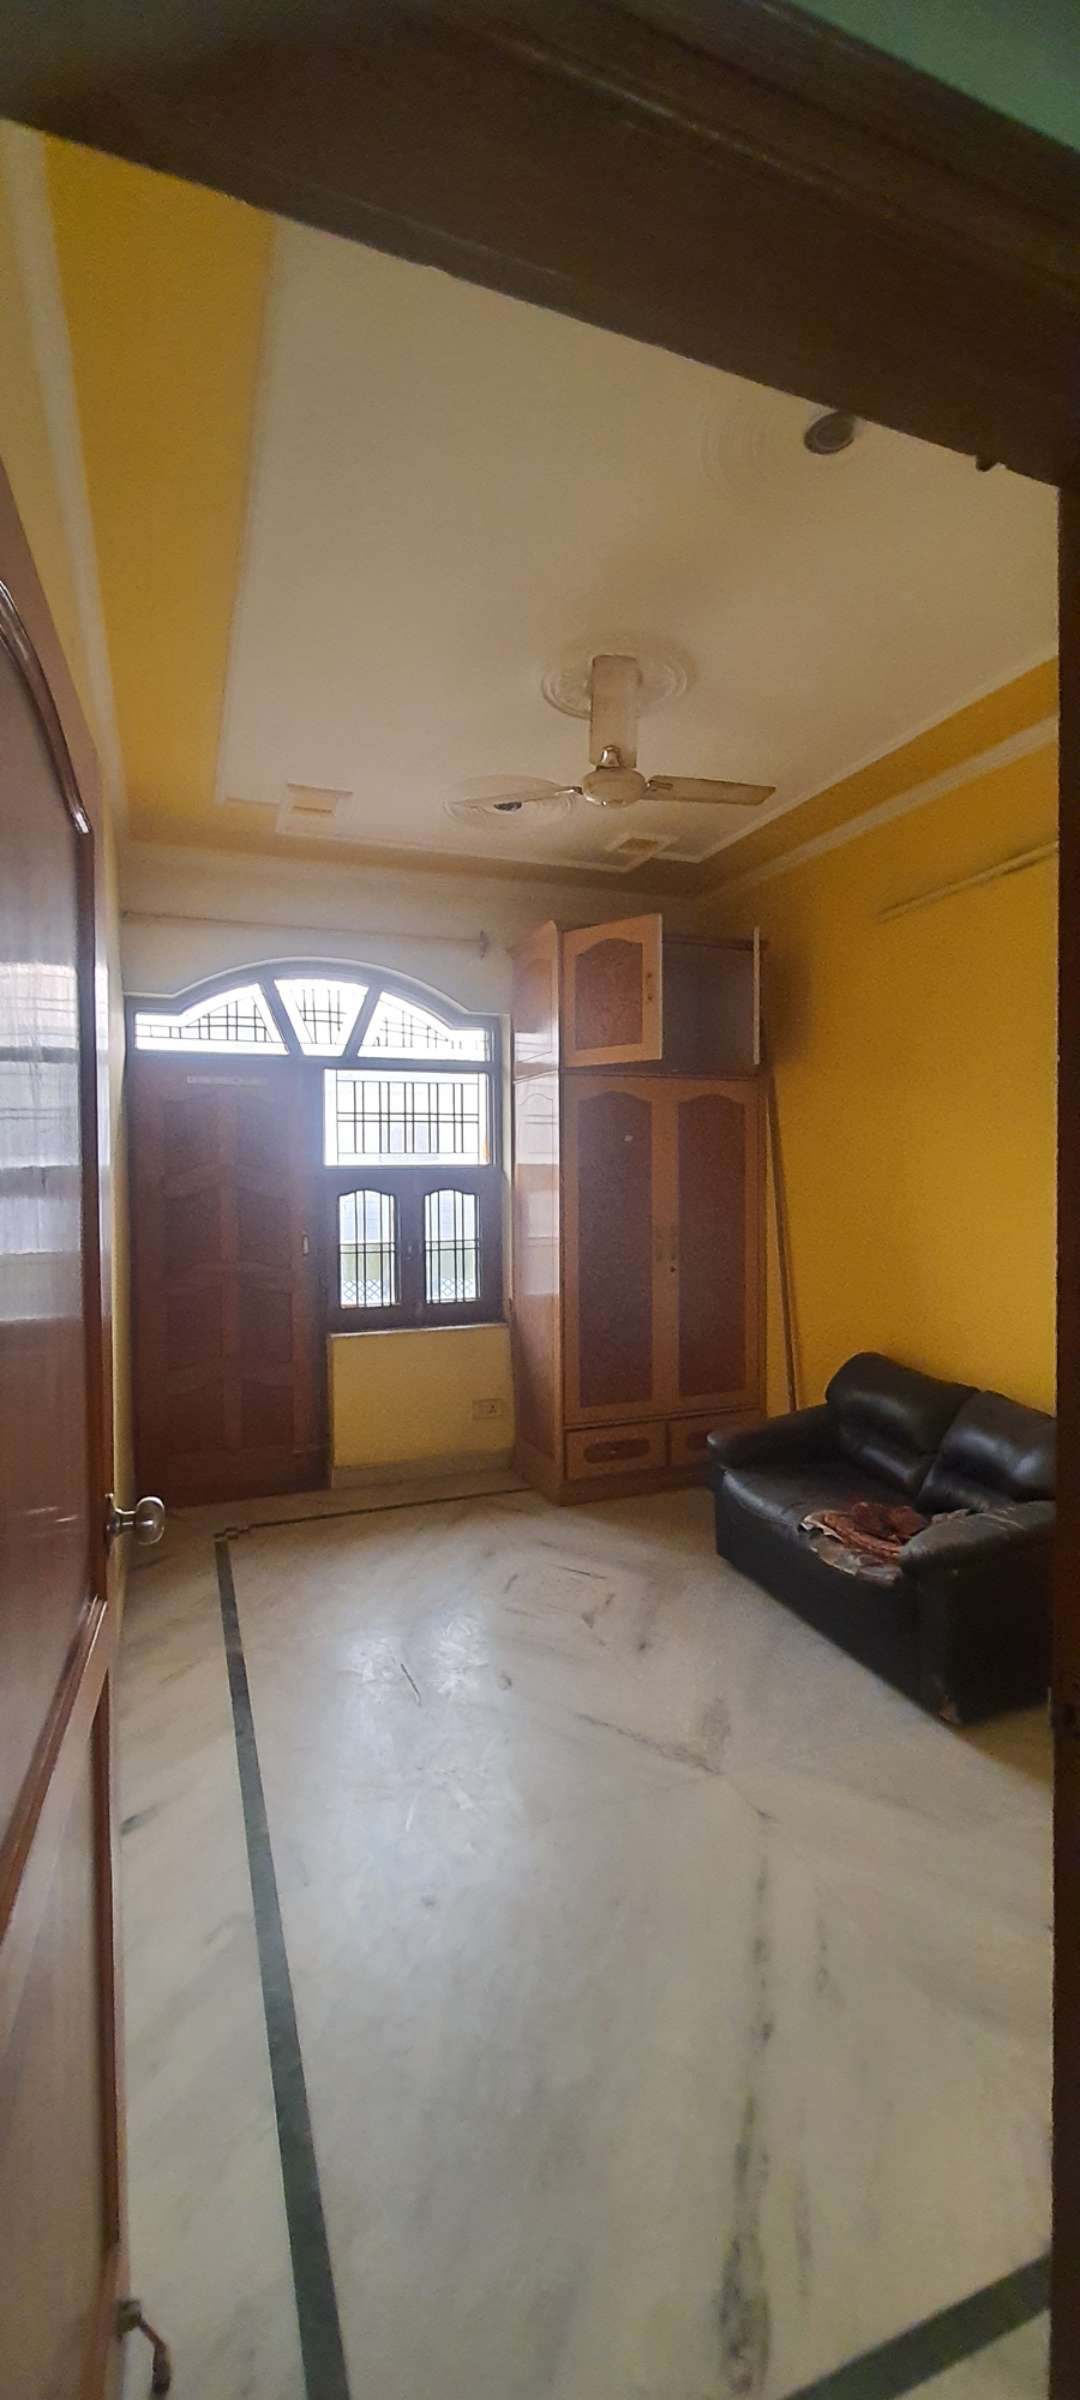 2.5 BHK Independent House For Rent in Sector 8 Faridabad 6678209